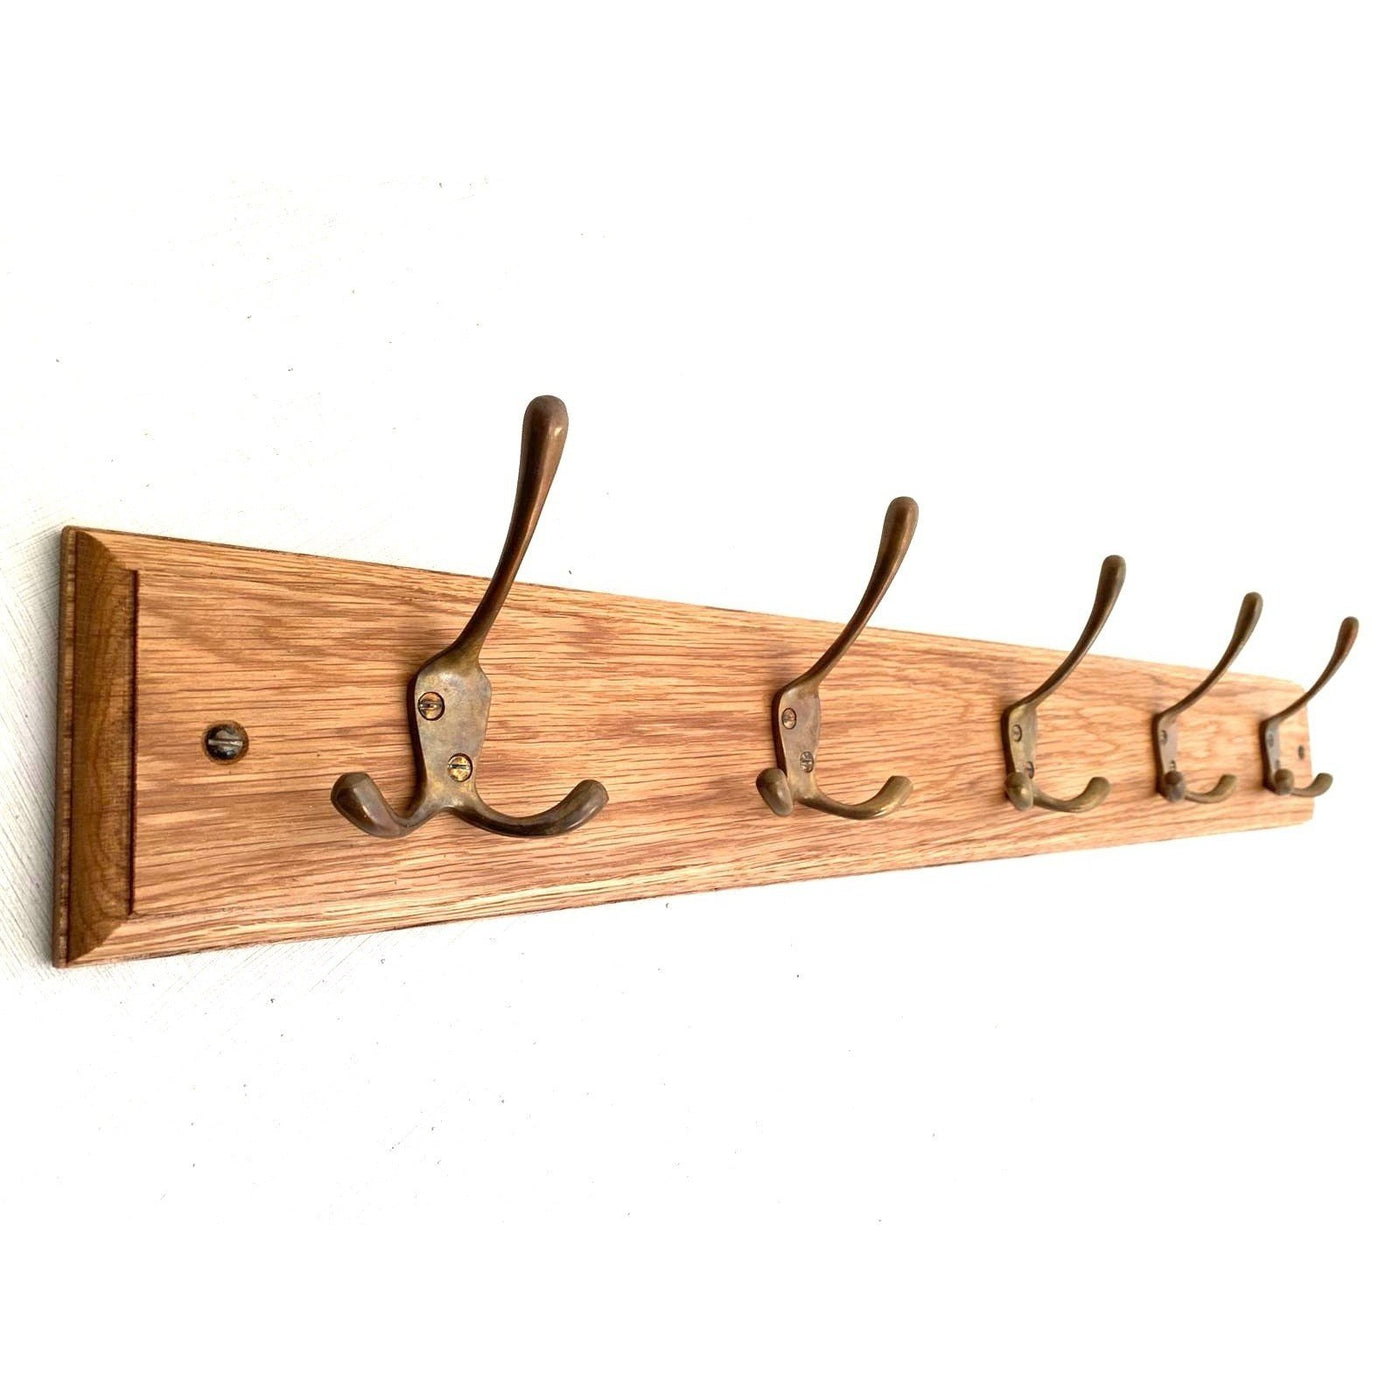 FOWLERS HANDMADE Solid OAK wooden coat rack with Antique finish